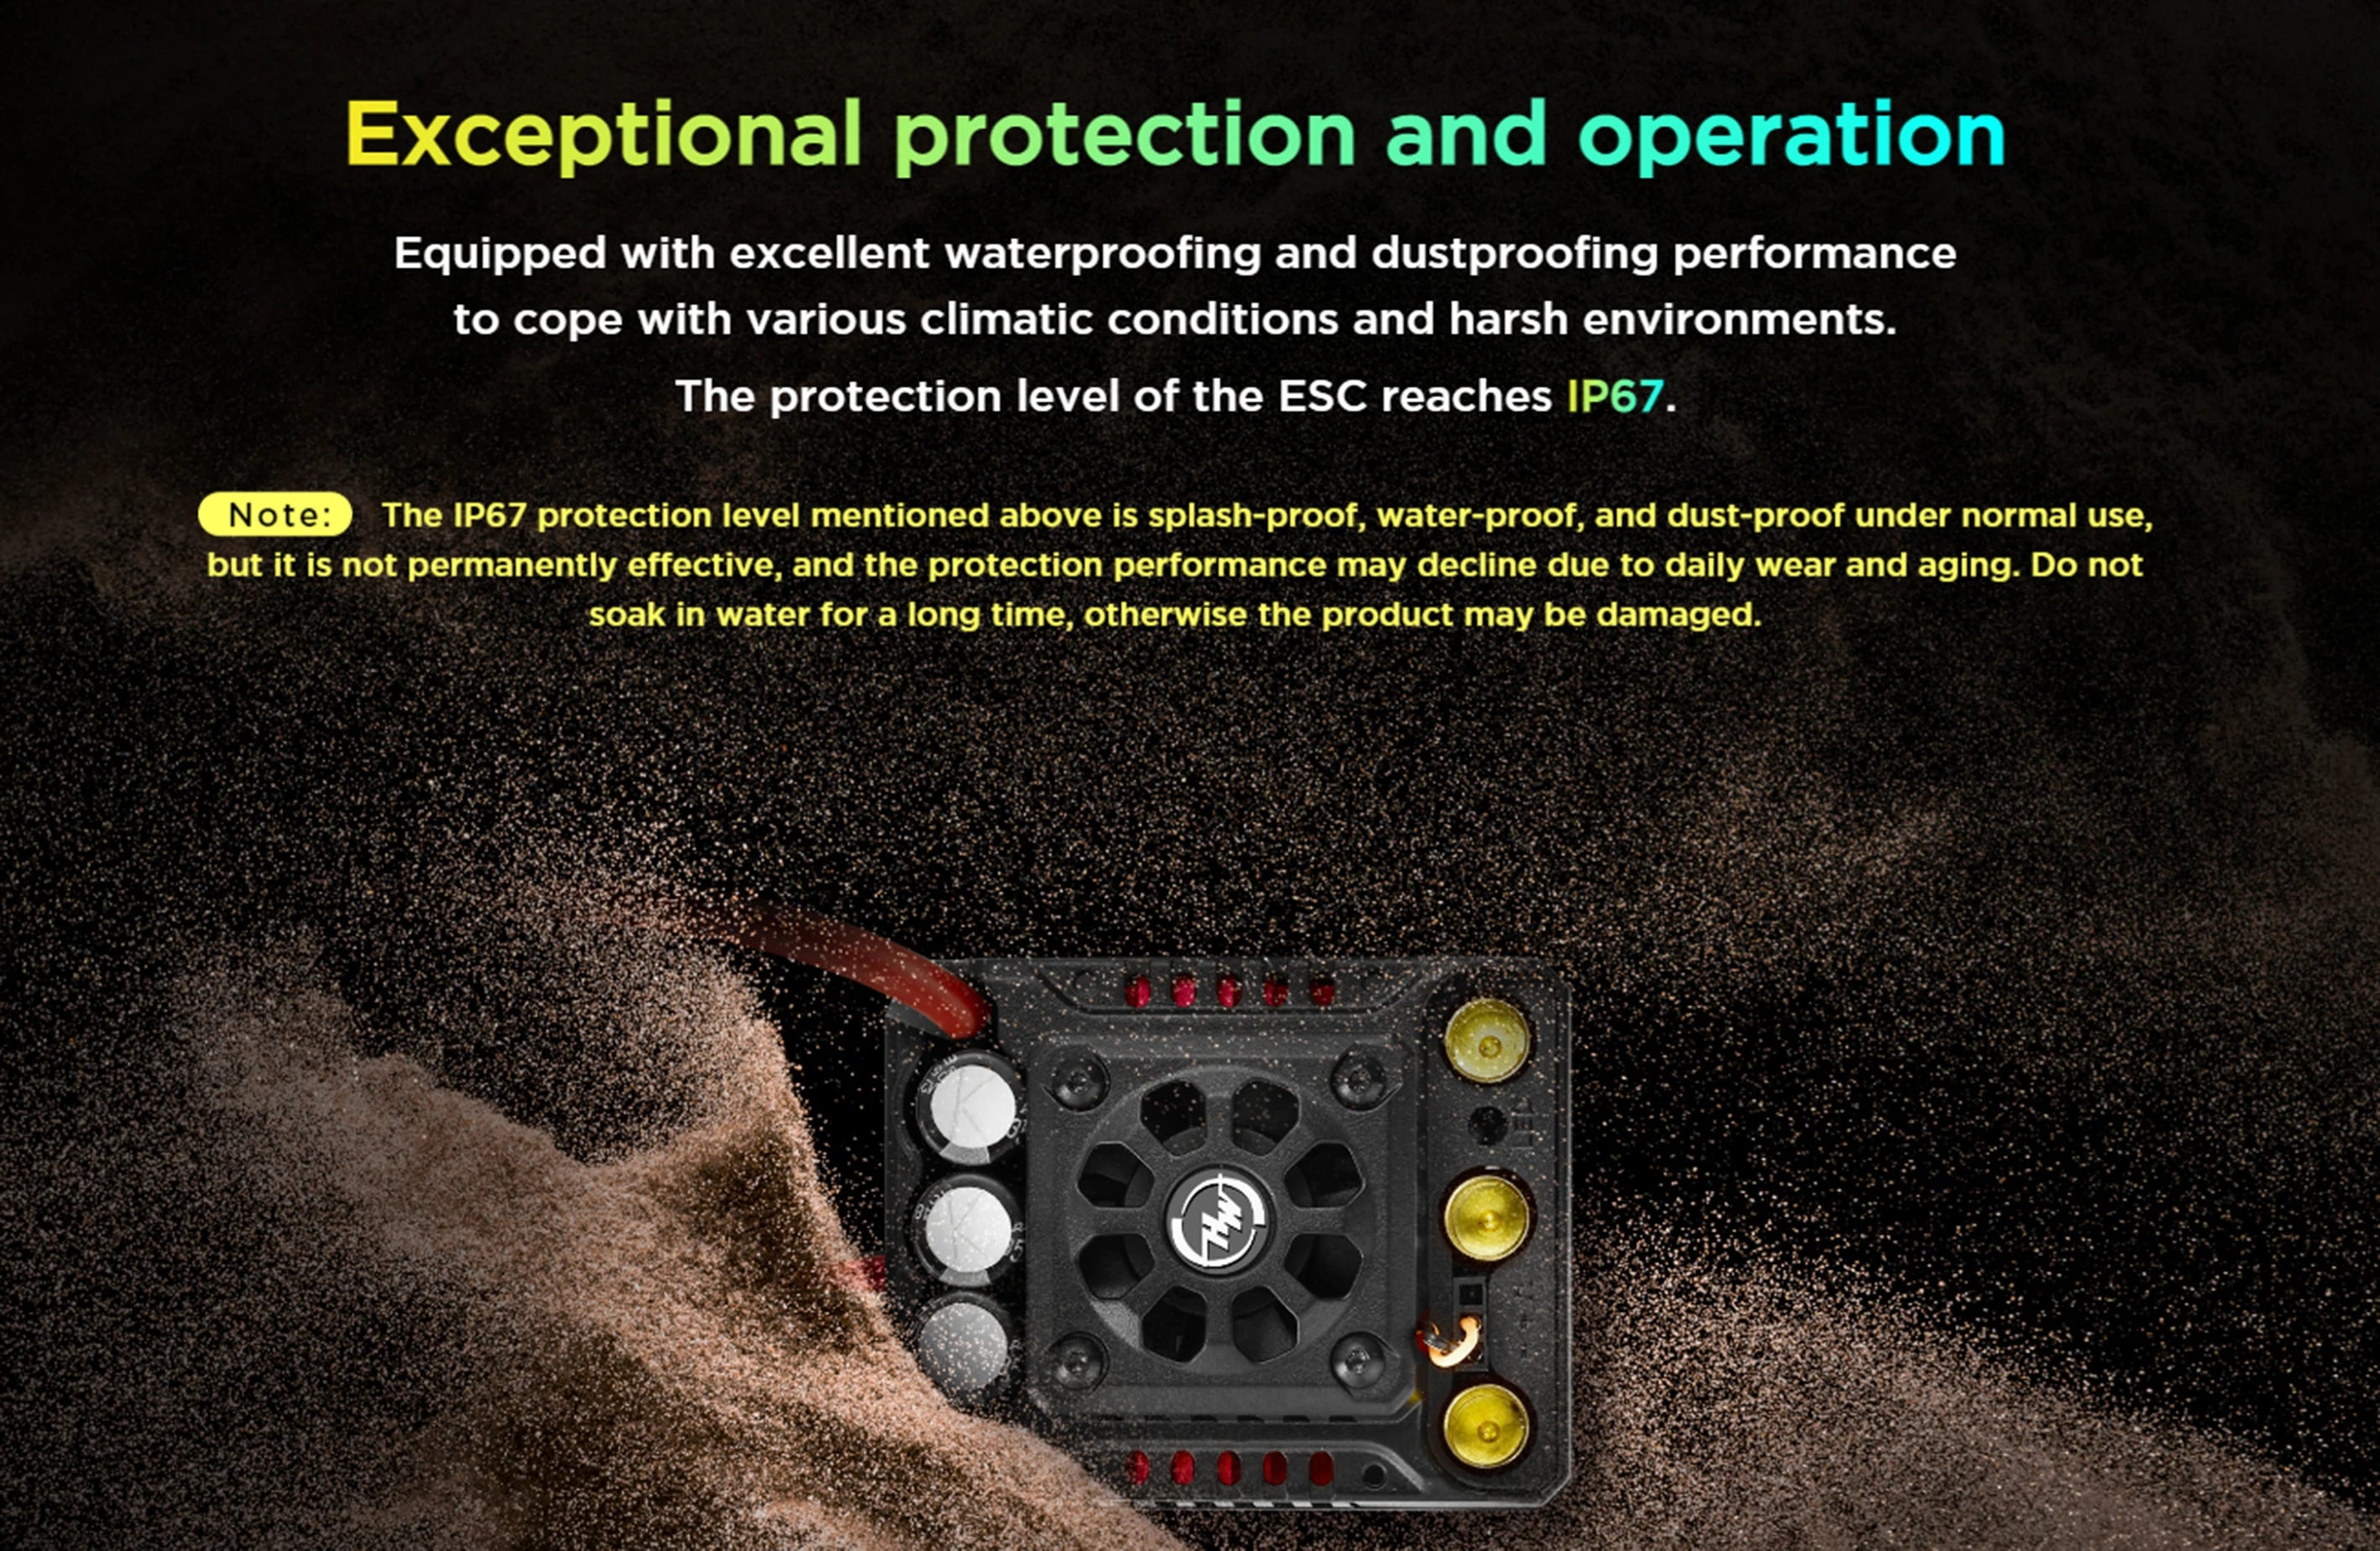 the IP67 protection level of the ESC is splash-proof, water-proof; and